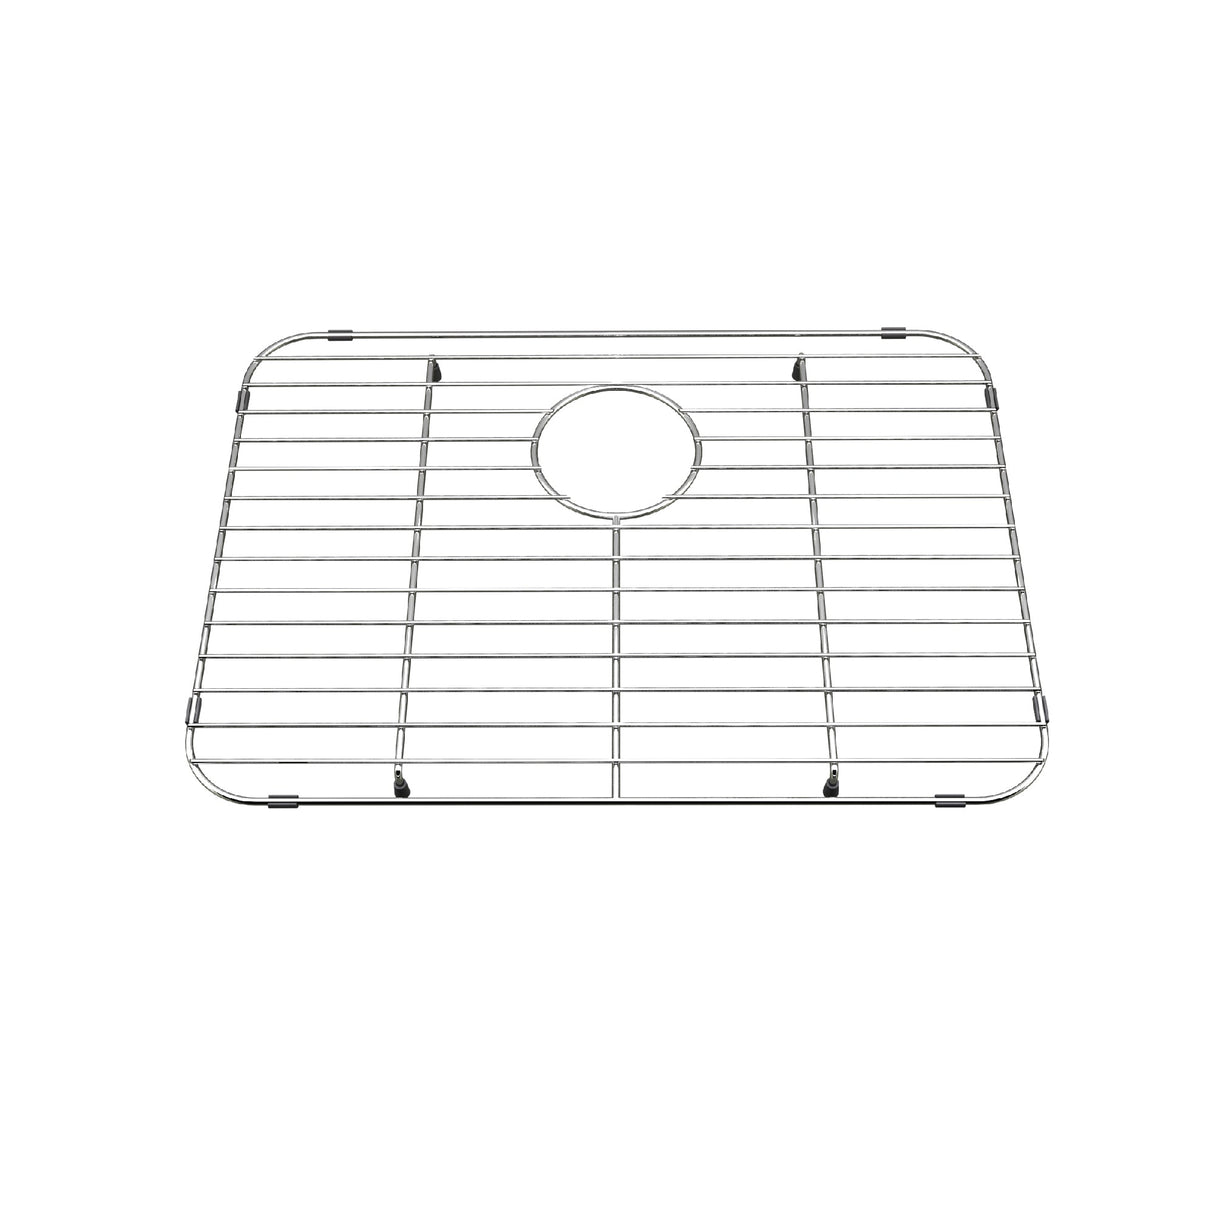 KINDRED BG2317R Stainless Steel Bottom Grid for Sink 15.5-in x 21.5-in In Stainless Steel